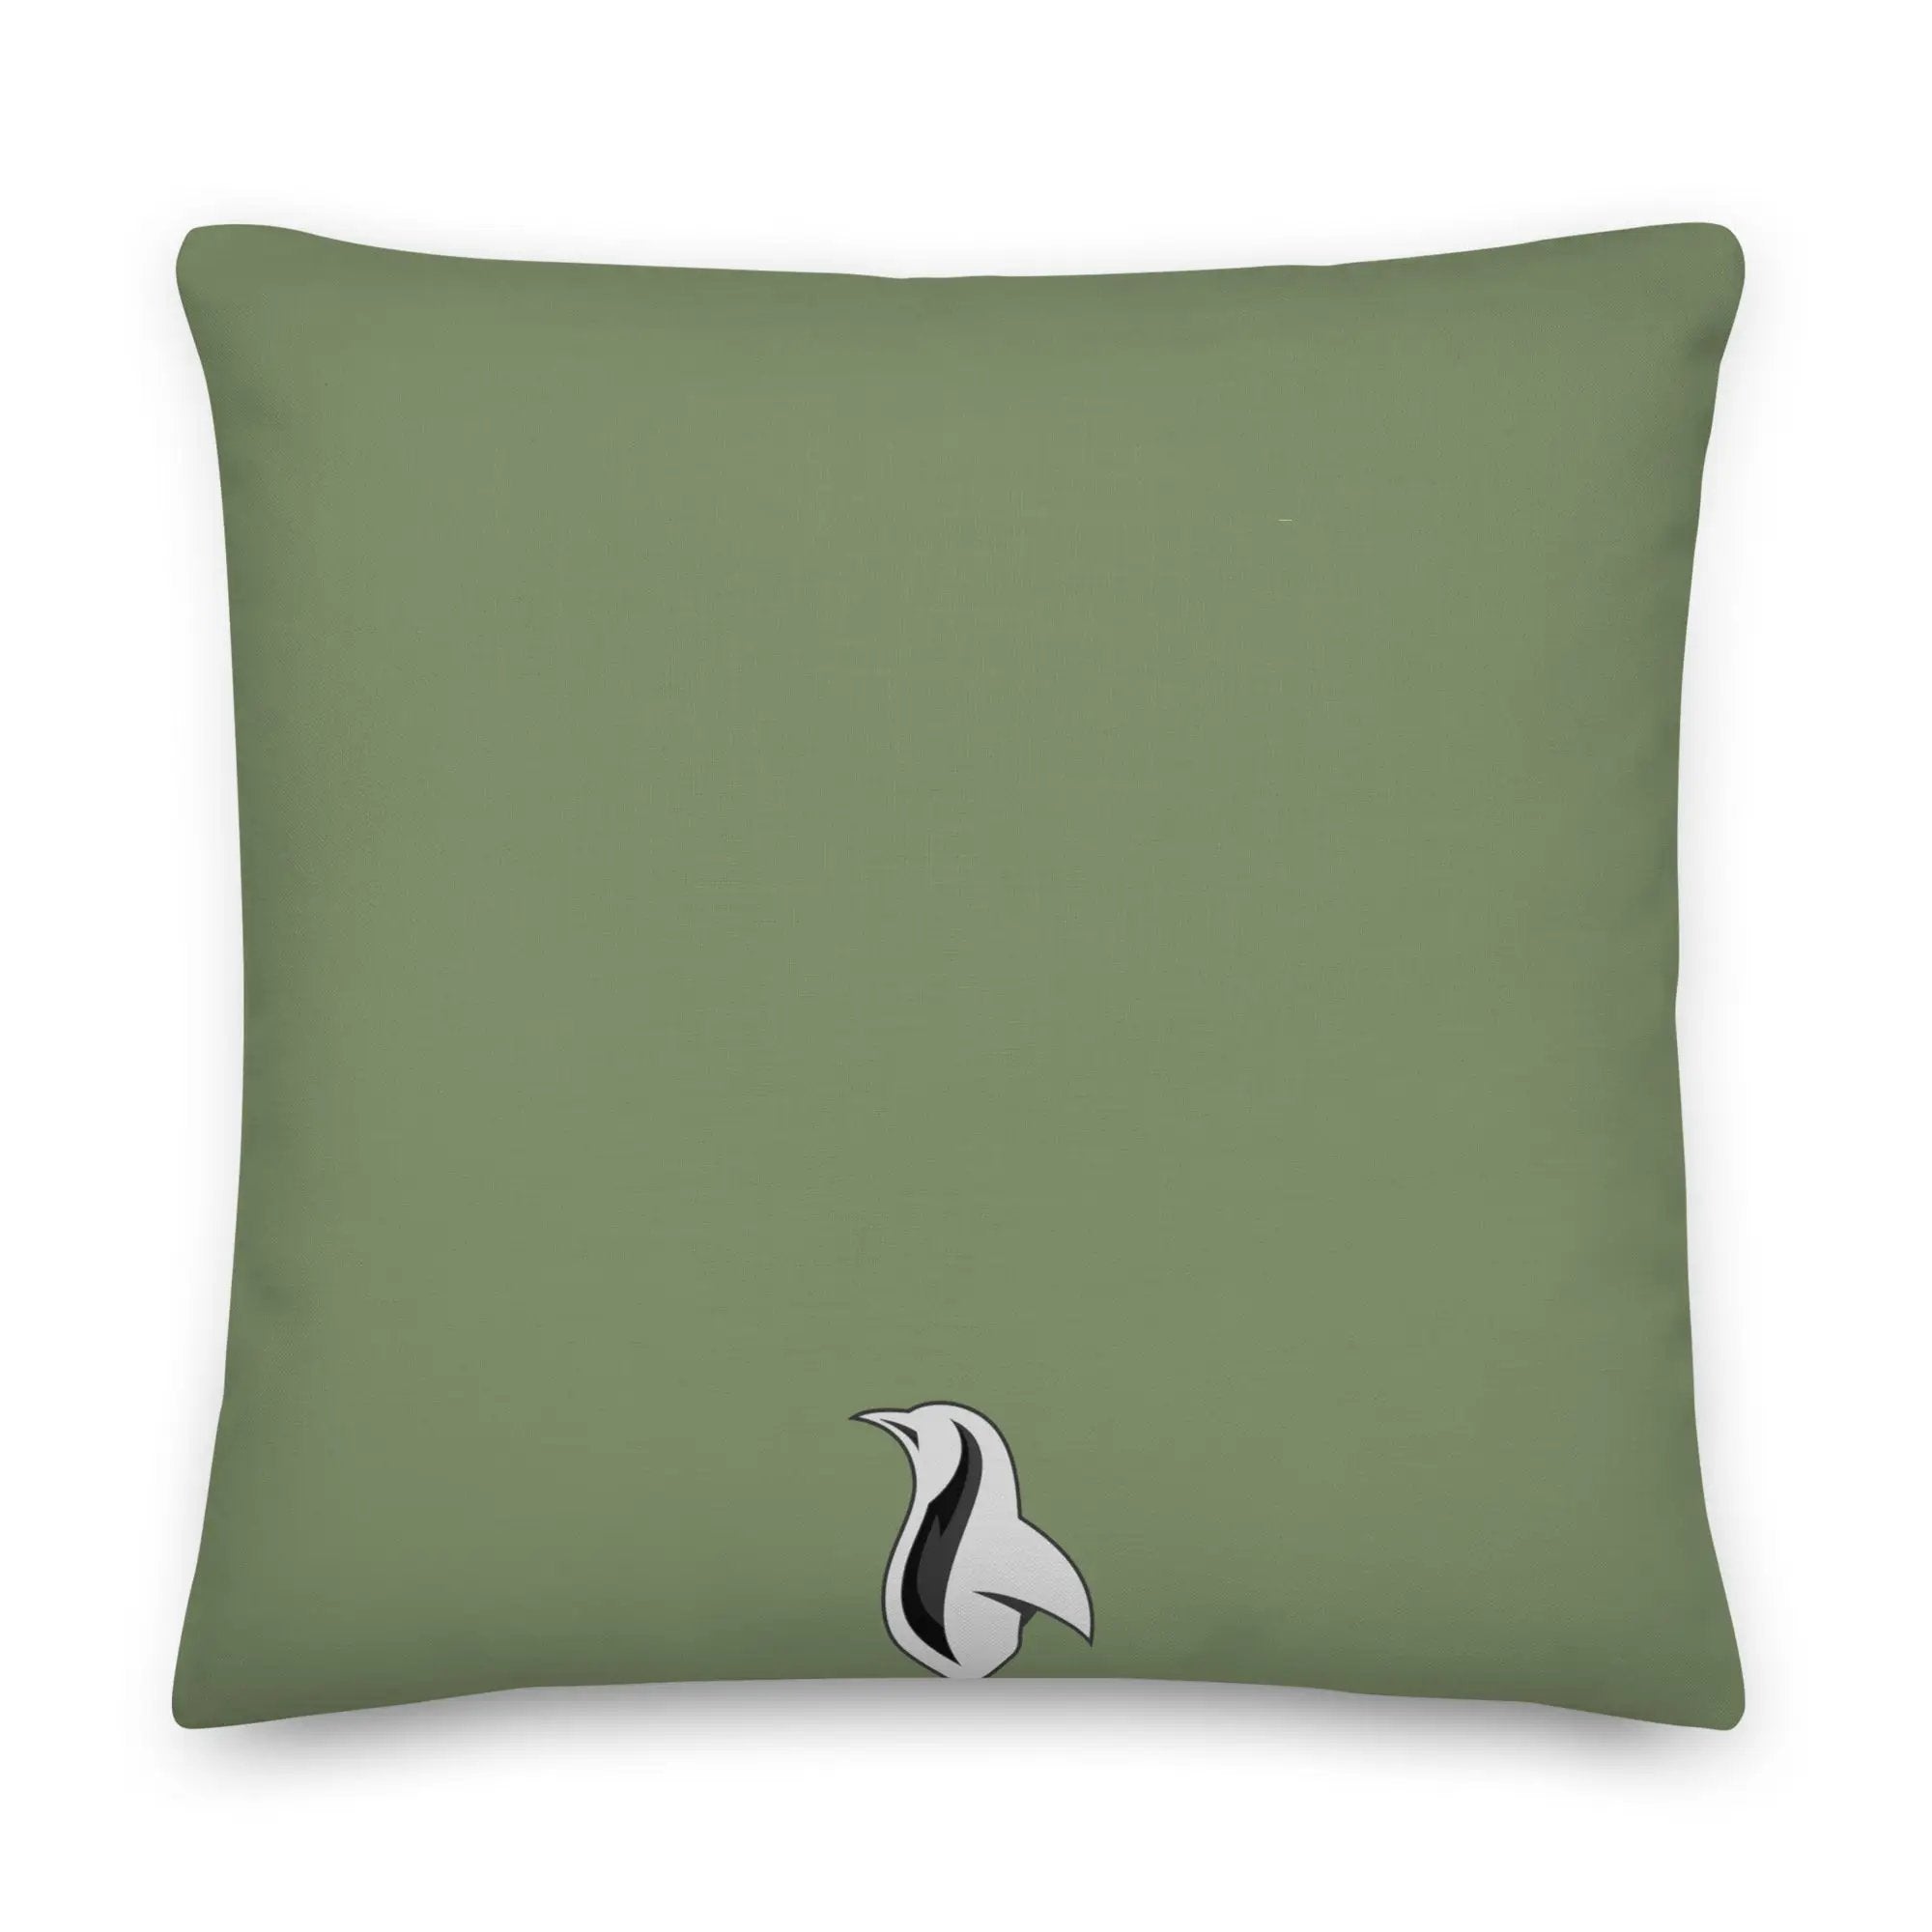 a green pillow with three cartoon characters on it